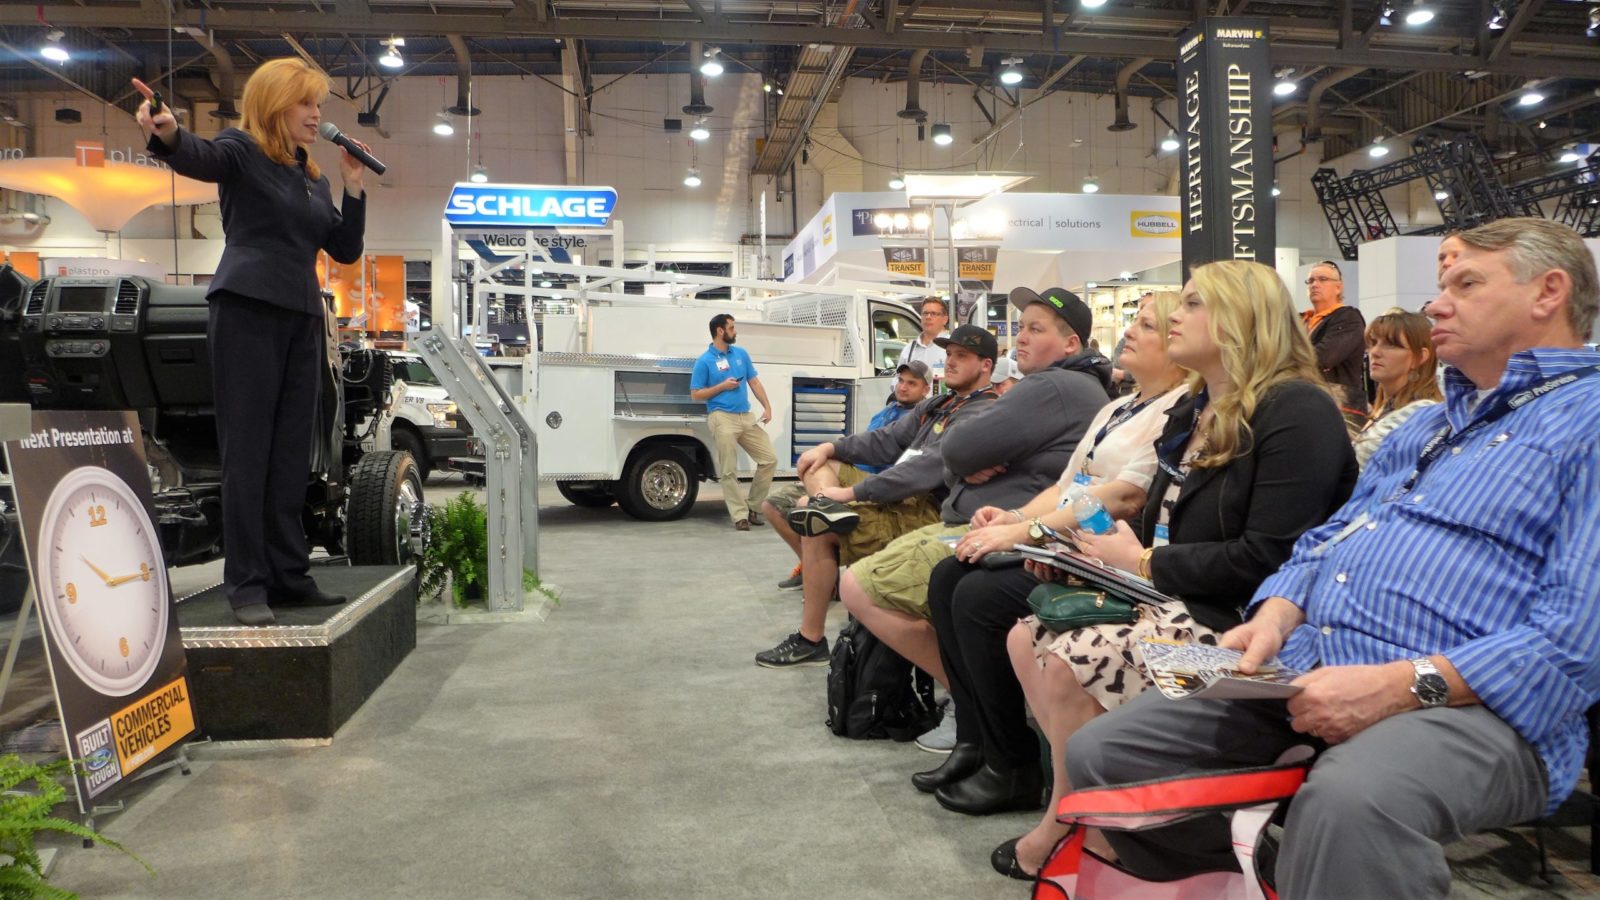 TPG Presenter delivers the pitch in the Ford booth at the International Builders' Show.